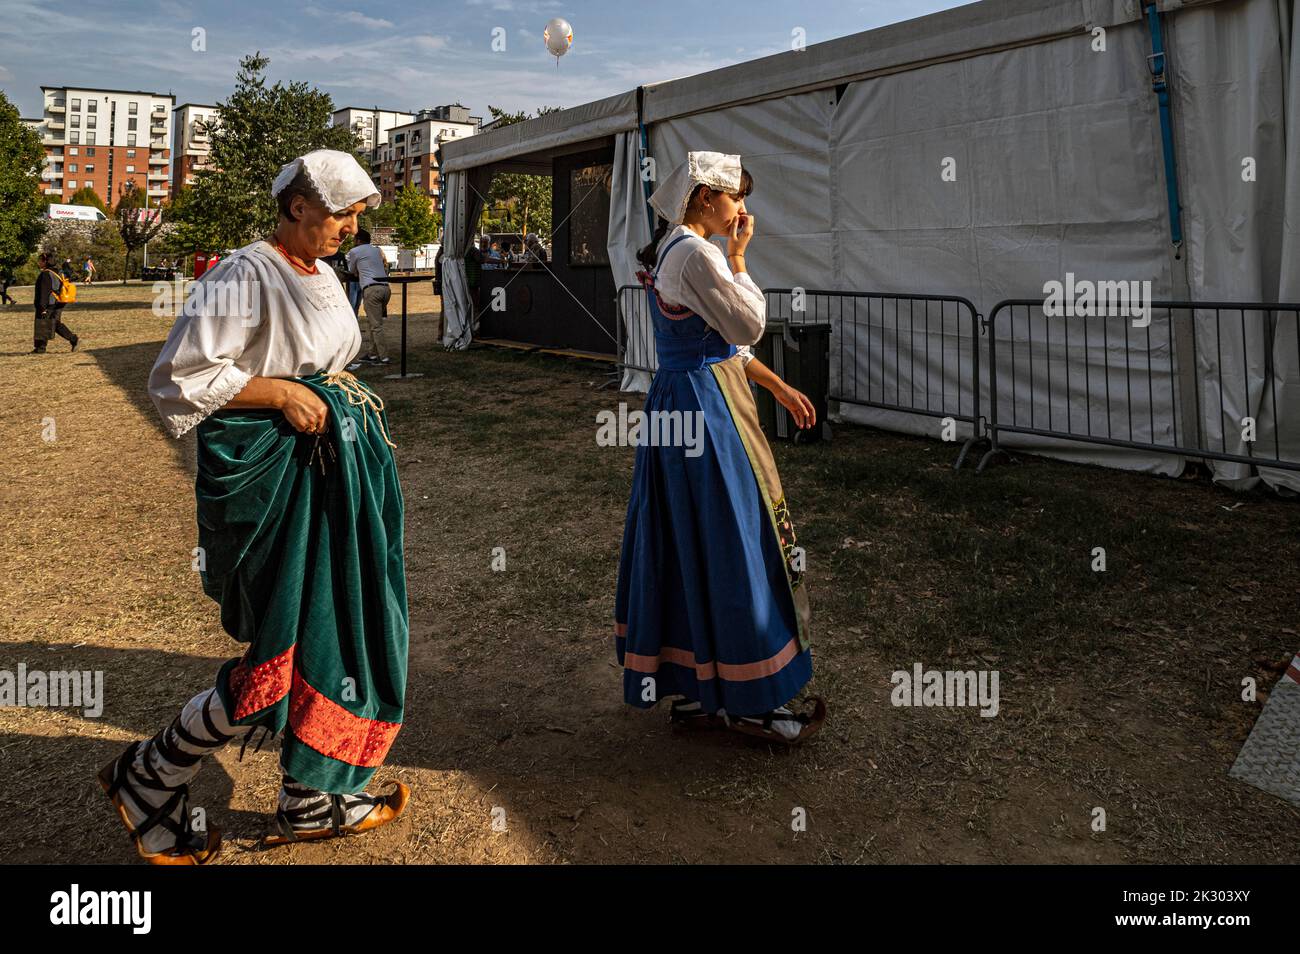 Italie. 23rd septembre 2022. Italie Turin Parco Dora 'Terra Madre - Salone del Gusto 2022' -costumes traditionnels calabrais crédit: Realy Easy Star/Alamy Live News Banque D'Images